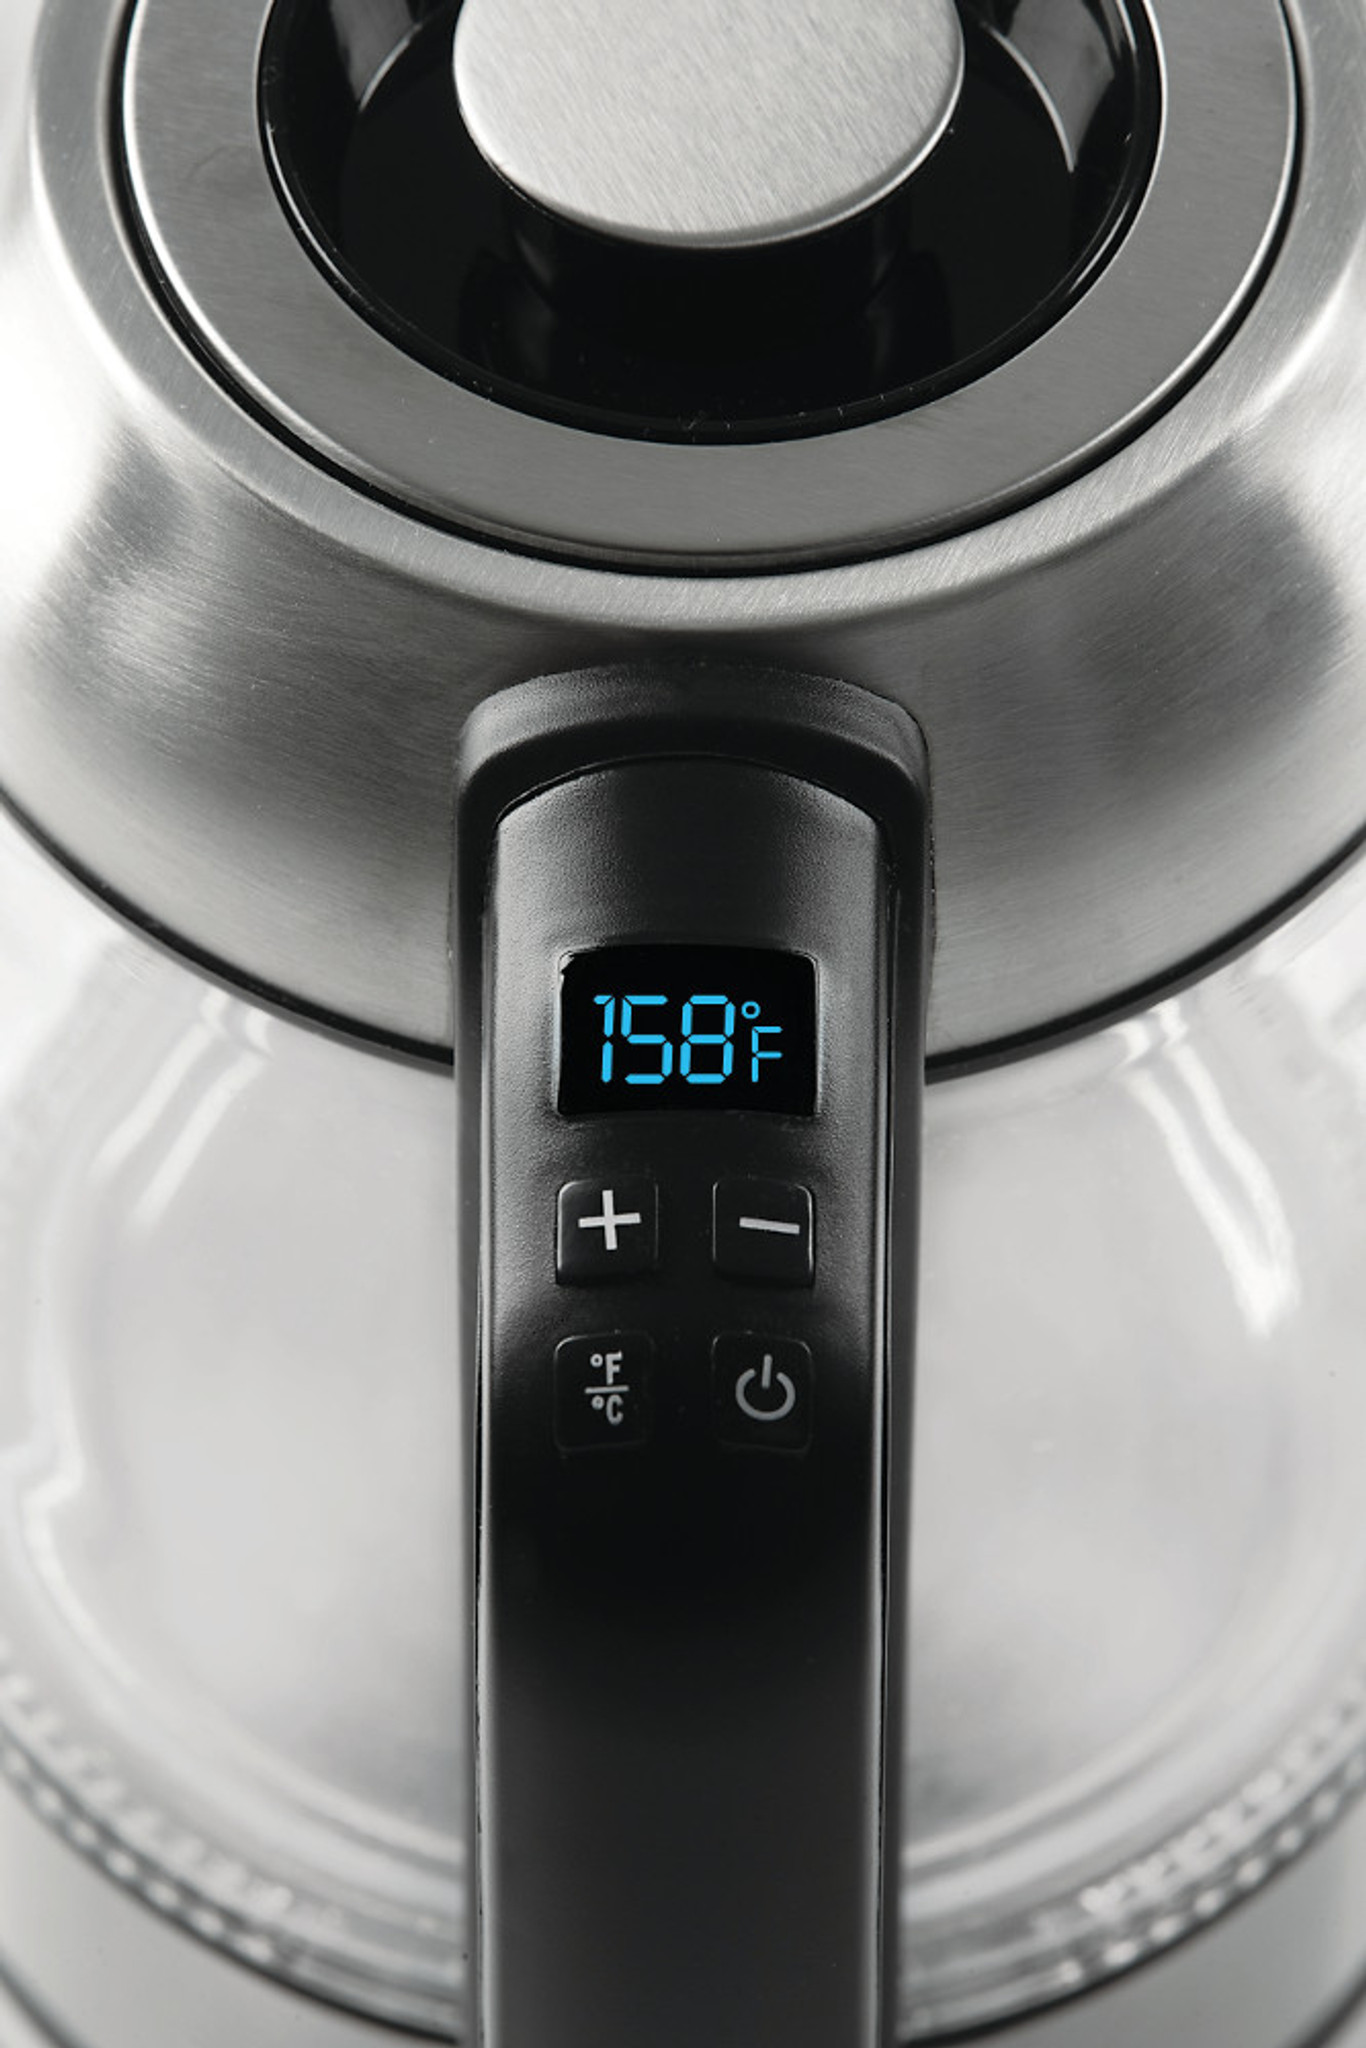 Cordless Glass Water Kettle - The Tea Smith